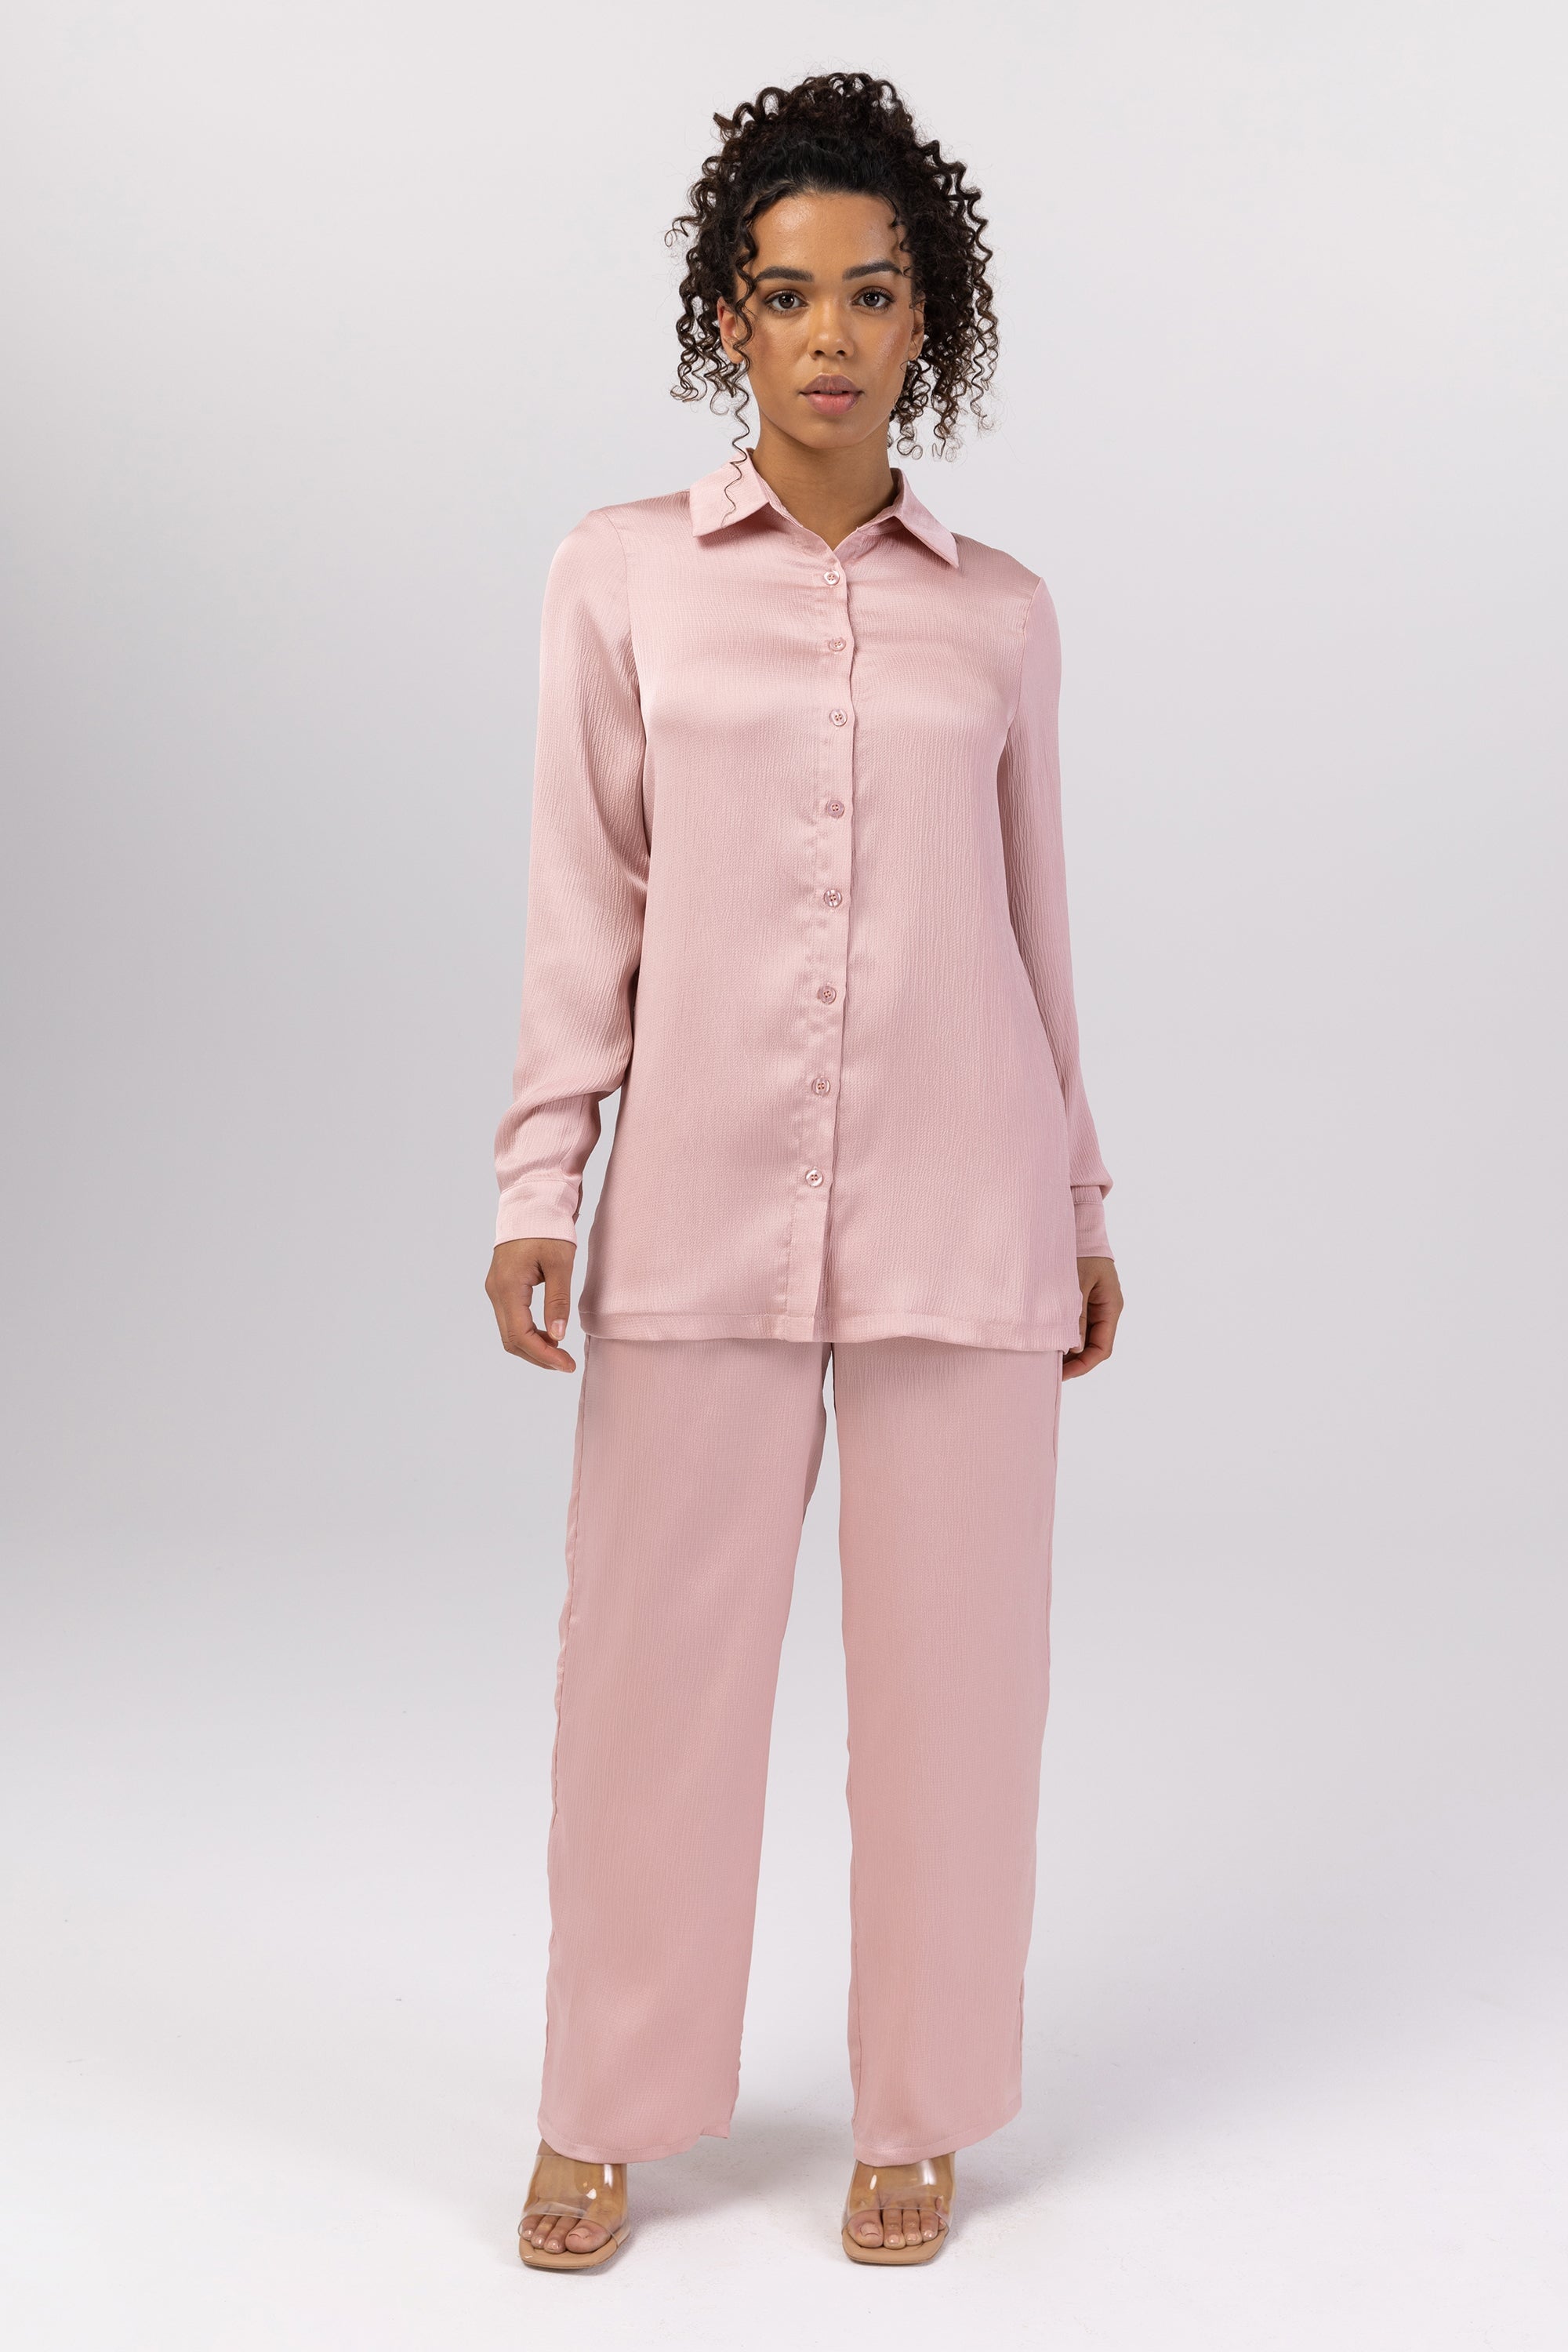 Katia Textured Button Down Top - Dusty Pink epschoolboard 